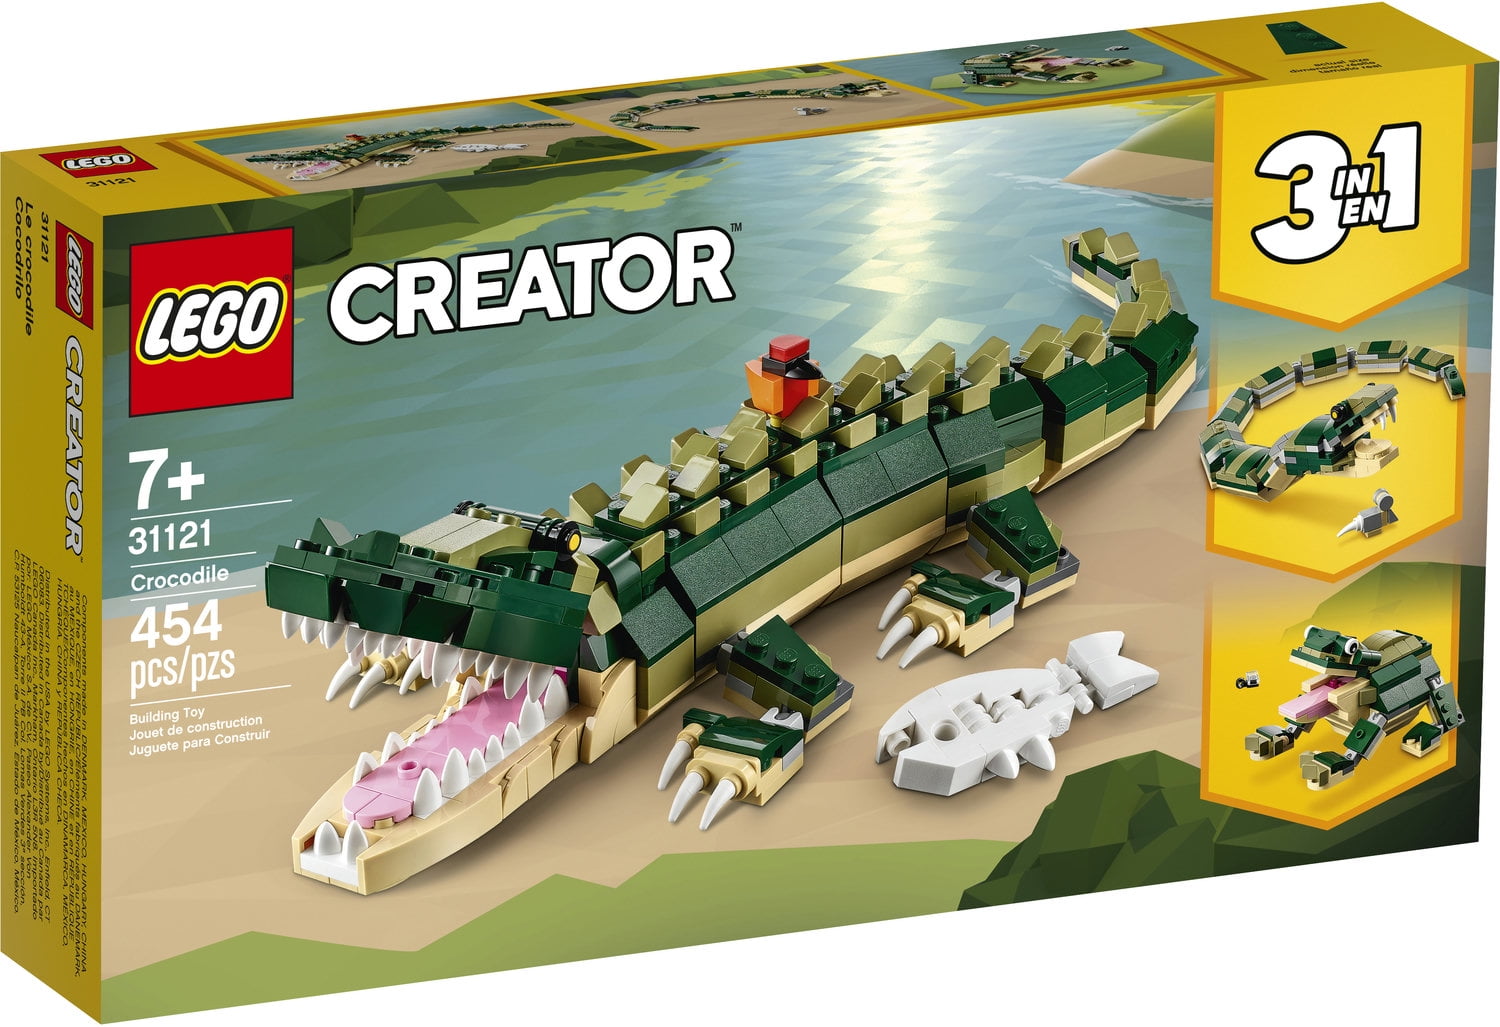 LEGO Creator 3in1 Crocodile 31121 Building Toy Featuring Wild Animal Toys  for Kids (454 Pieces) 